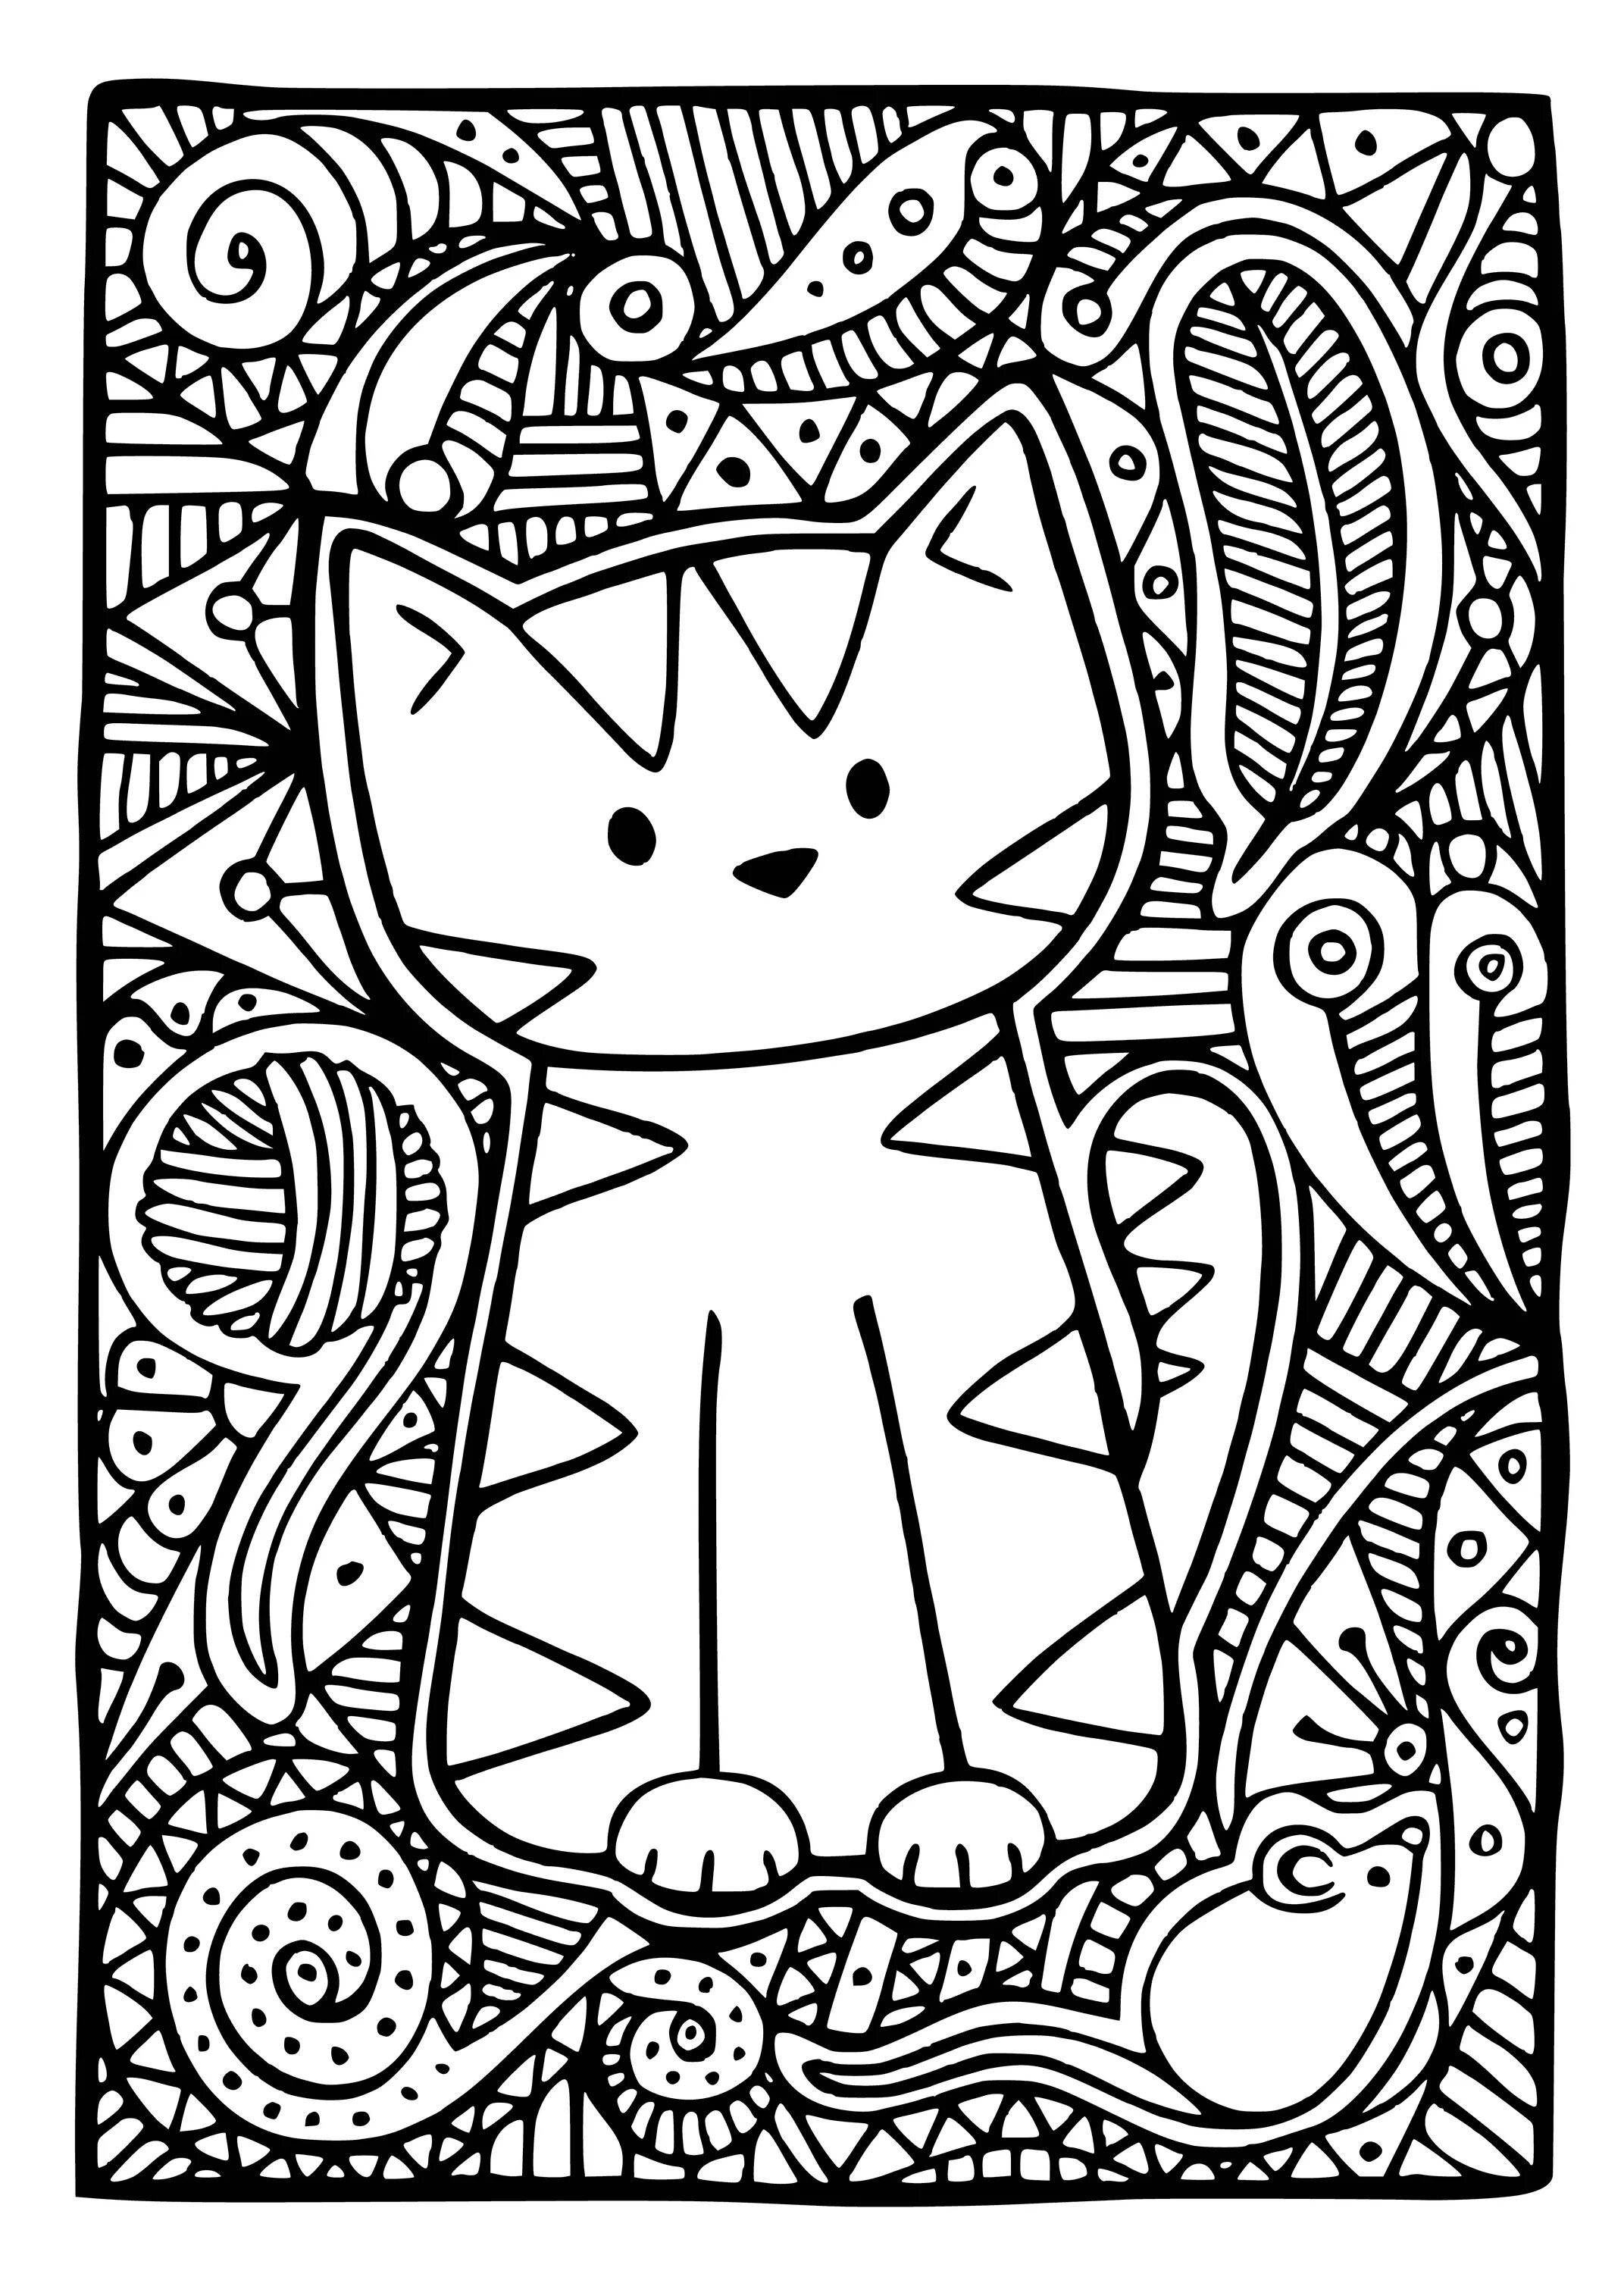 Live patterned cat coloring book